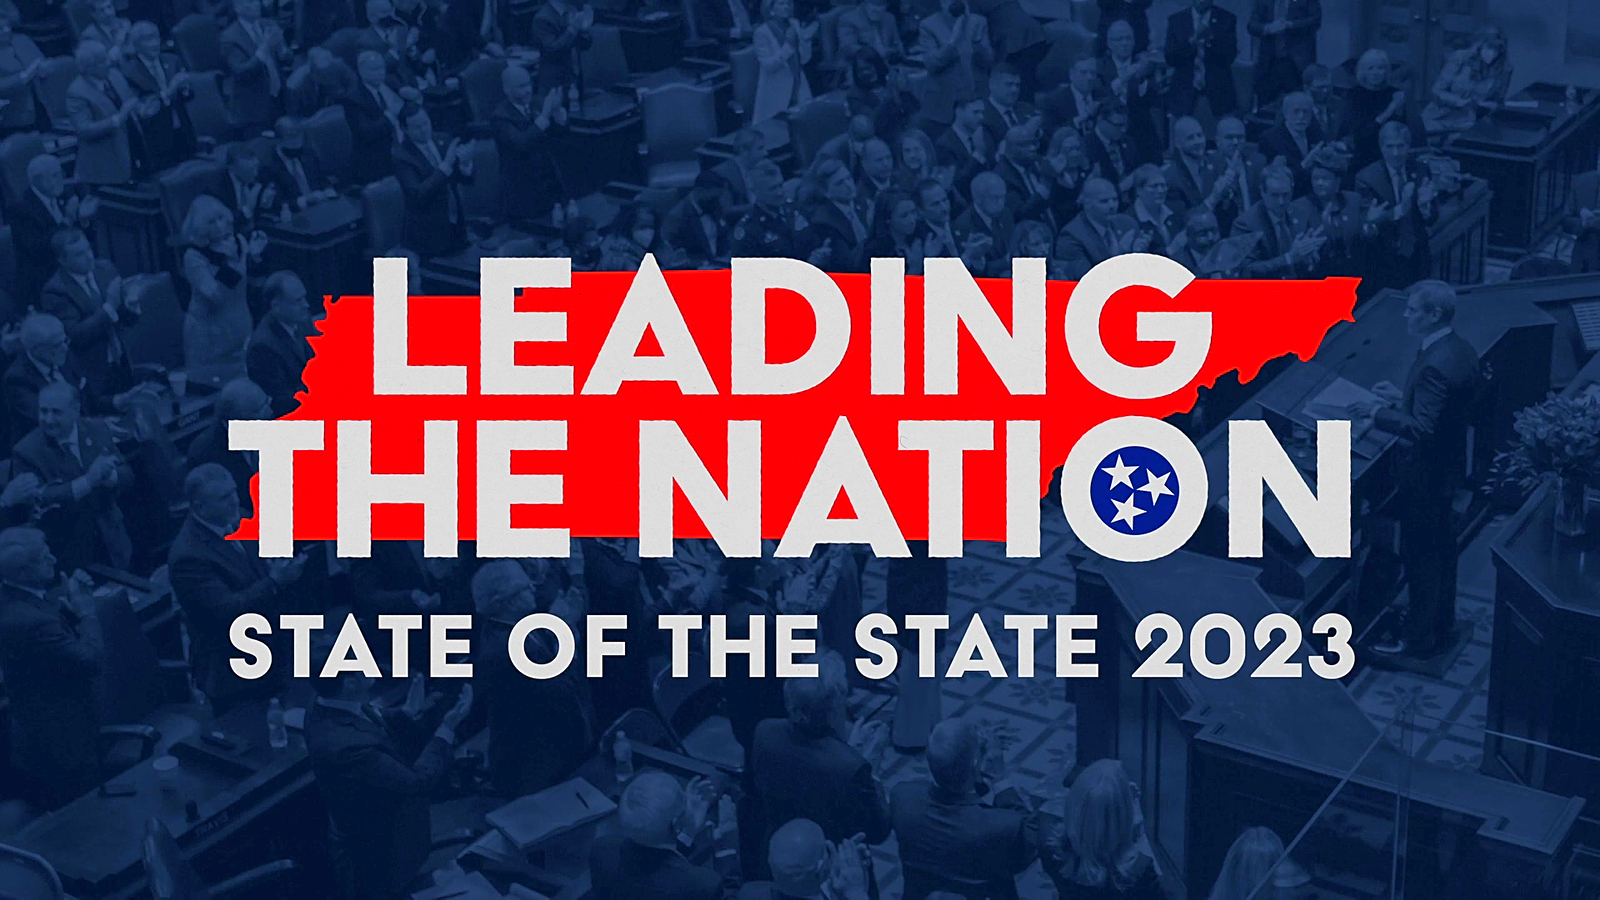 Gov. Lee Delivers 2023 State of the State Address ‘Tennessee Leading